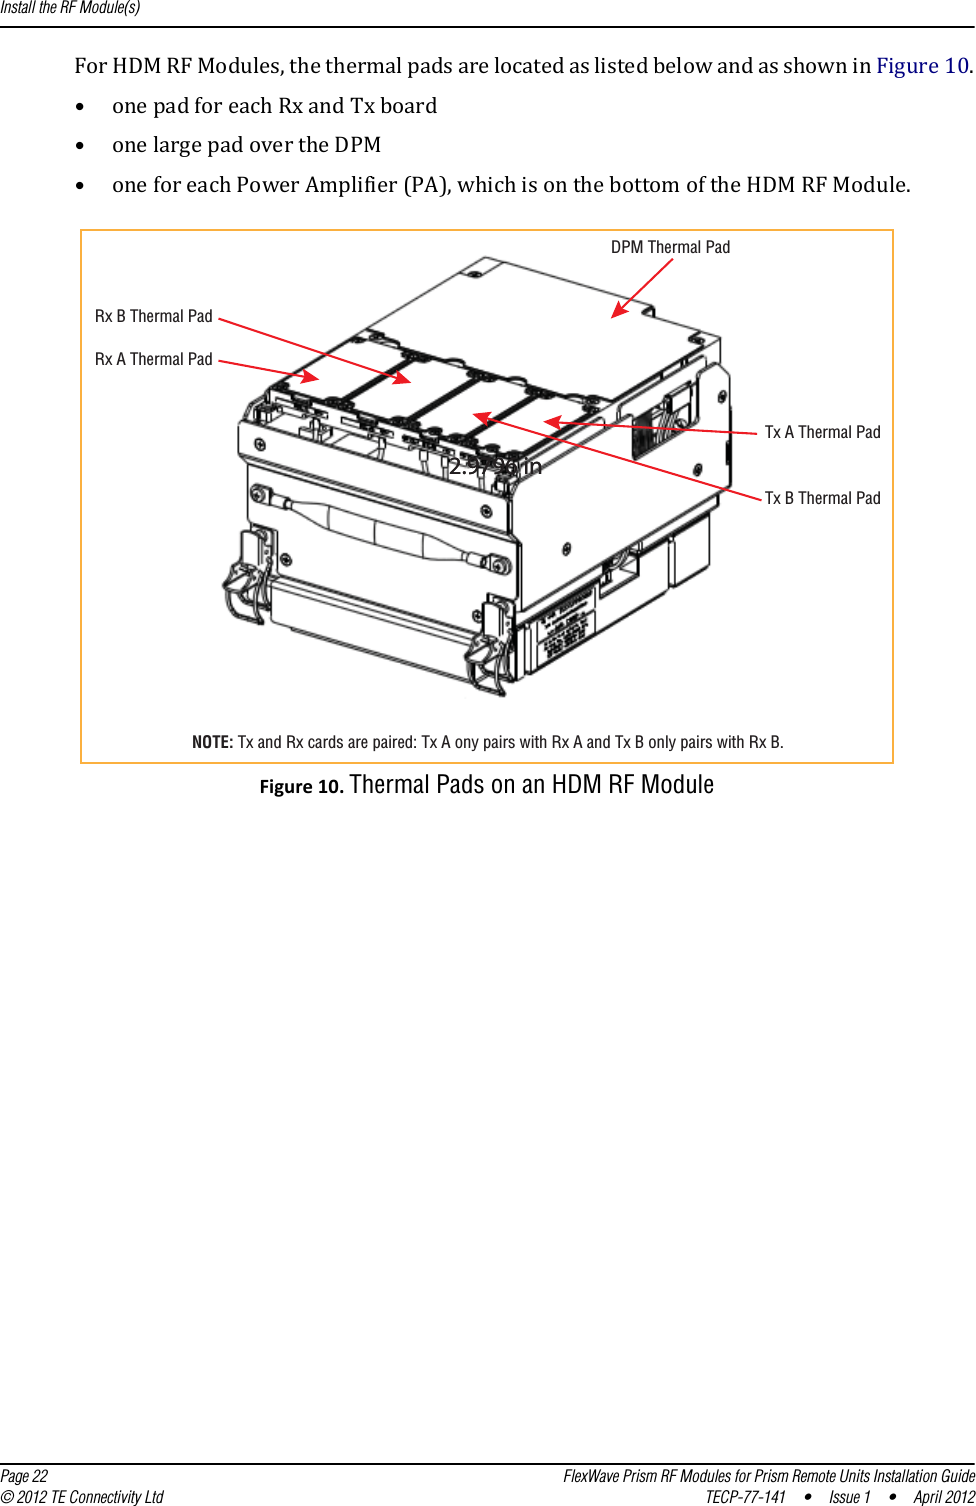 Install the RF Module(s)  Page 22 FlexWave Prism RF Modules for Prism Remote Units Installation Guide© 2012 TE Connectivity Ltd TECP-77-141 • Issue 1 • April 2012ForHDMRFModules,thethermalpadsarelocatedaslistedbelowandasshowninFigure10.•onepadforeachRxandTxboard•onelargepadovertheDPM•oneforeachPowerAmplifier(PA),whichisonthebottomoftheHDMRFModule.DPM Thermal PadTx A Thermal PadTx B Thermal PadRx A Thermal PadRx B Thermal Pad2.9796 in2.9796 inNOTE: Tx and Rx cards are paired: Tx A ony pairs with Rx A and Tx B only pairs with Rx B.Figure10.Thermal Pads on an HDM RF Module